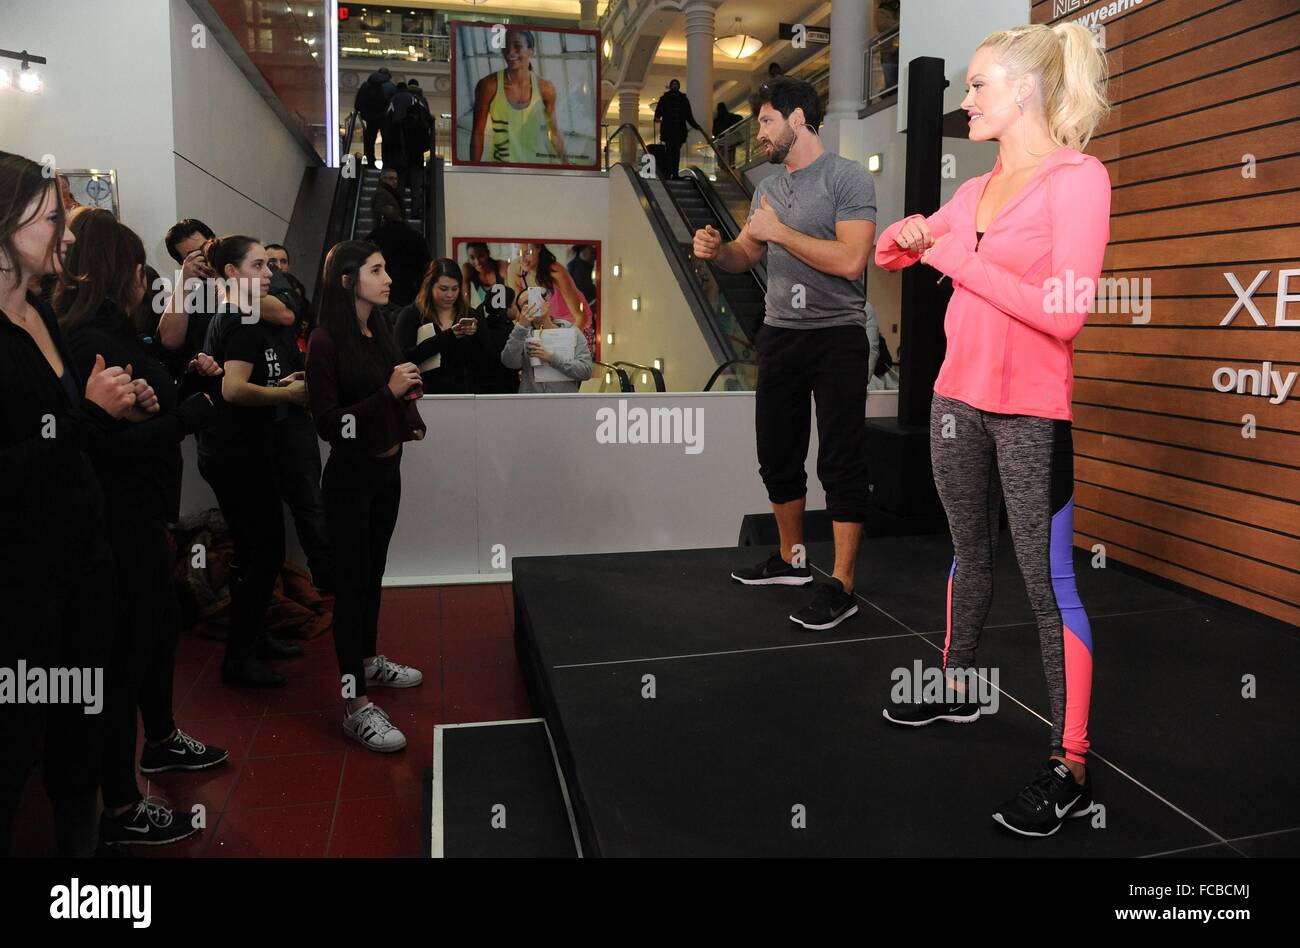 New York, NY, USA. 21st Jan, 2016. Maksim Chmerkovskiy, Peta Murgatroyd at  a public appearance for JCPenney Promotes Exclusive Xersion Activewear with  Latin Dance Lessons for Shoppers, Manhattan Mall, New York, NY